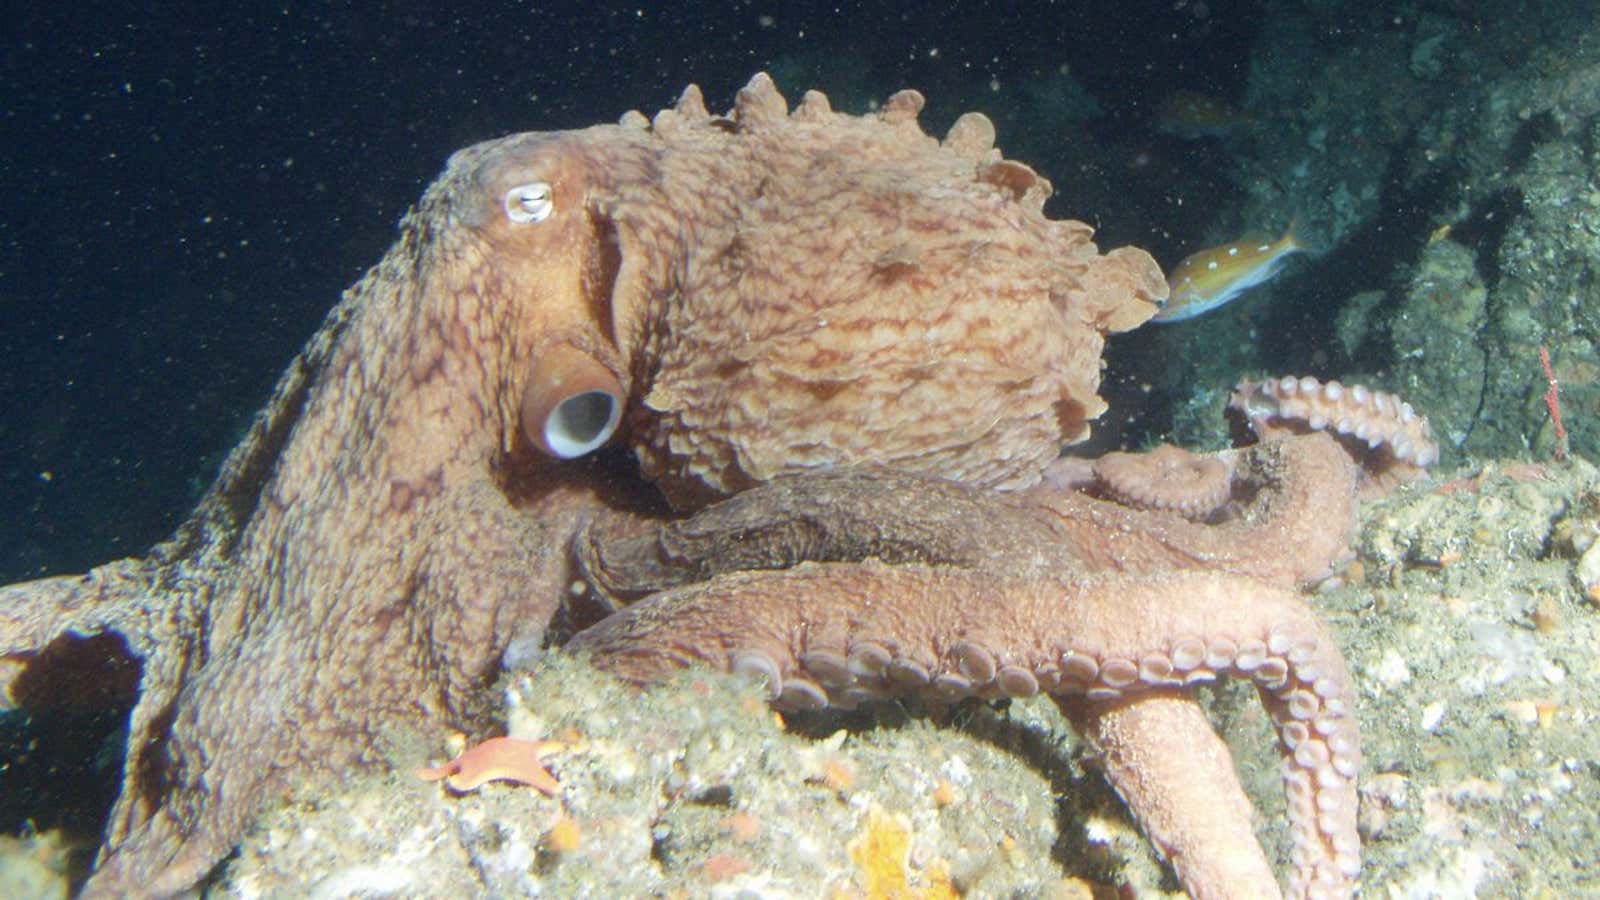 Is this a giant Pacific octopus, or a frilled giant Pacific octopus?